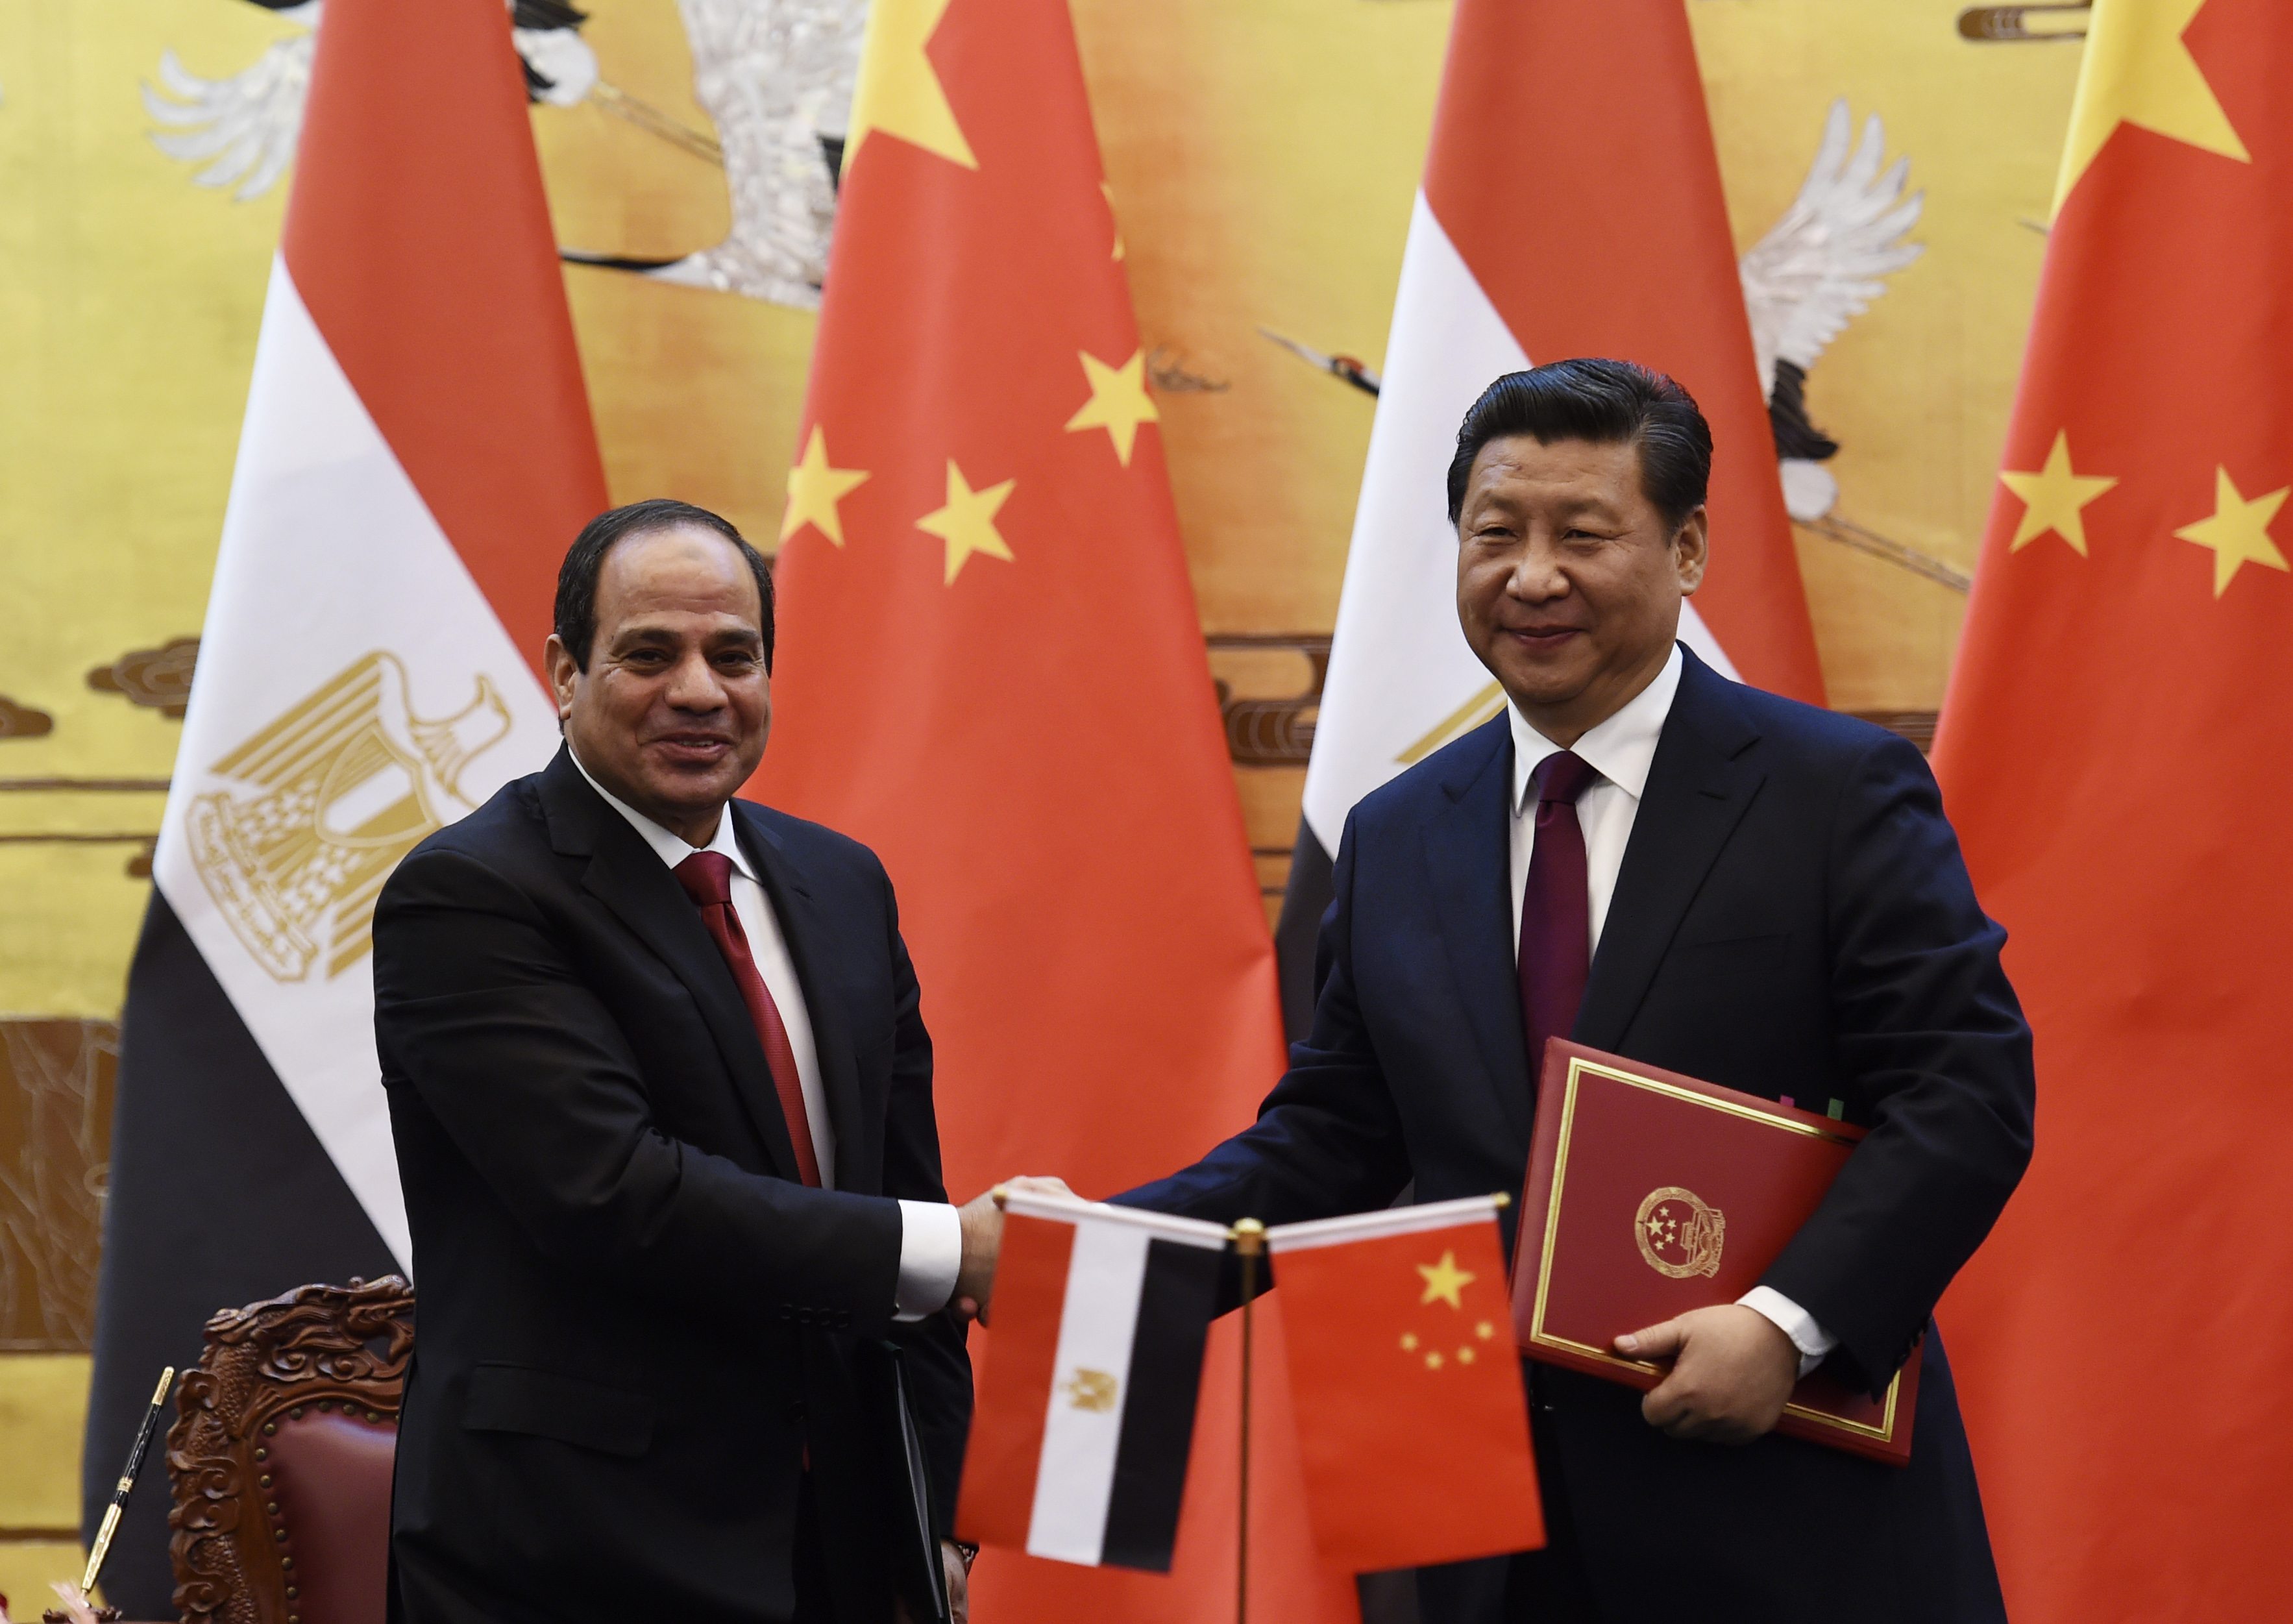 Egypt's President Abdel Fattah al-Sisi (L) shakes hands with Chinese President Xi Jinping during a signing ceremony in the Great Hall of the People in Beijing December 23, 2014.   REUTERS/Greg Baker/Pool   (CHINA - Tags: POLITICS)